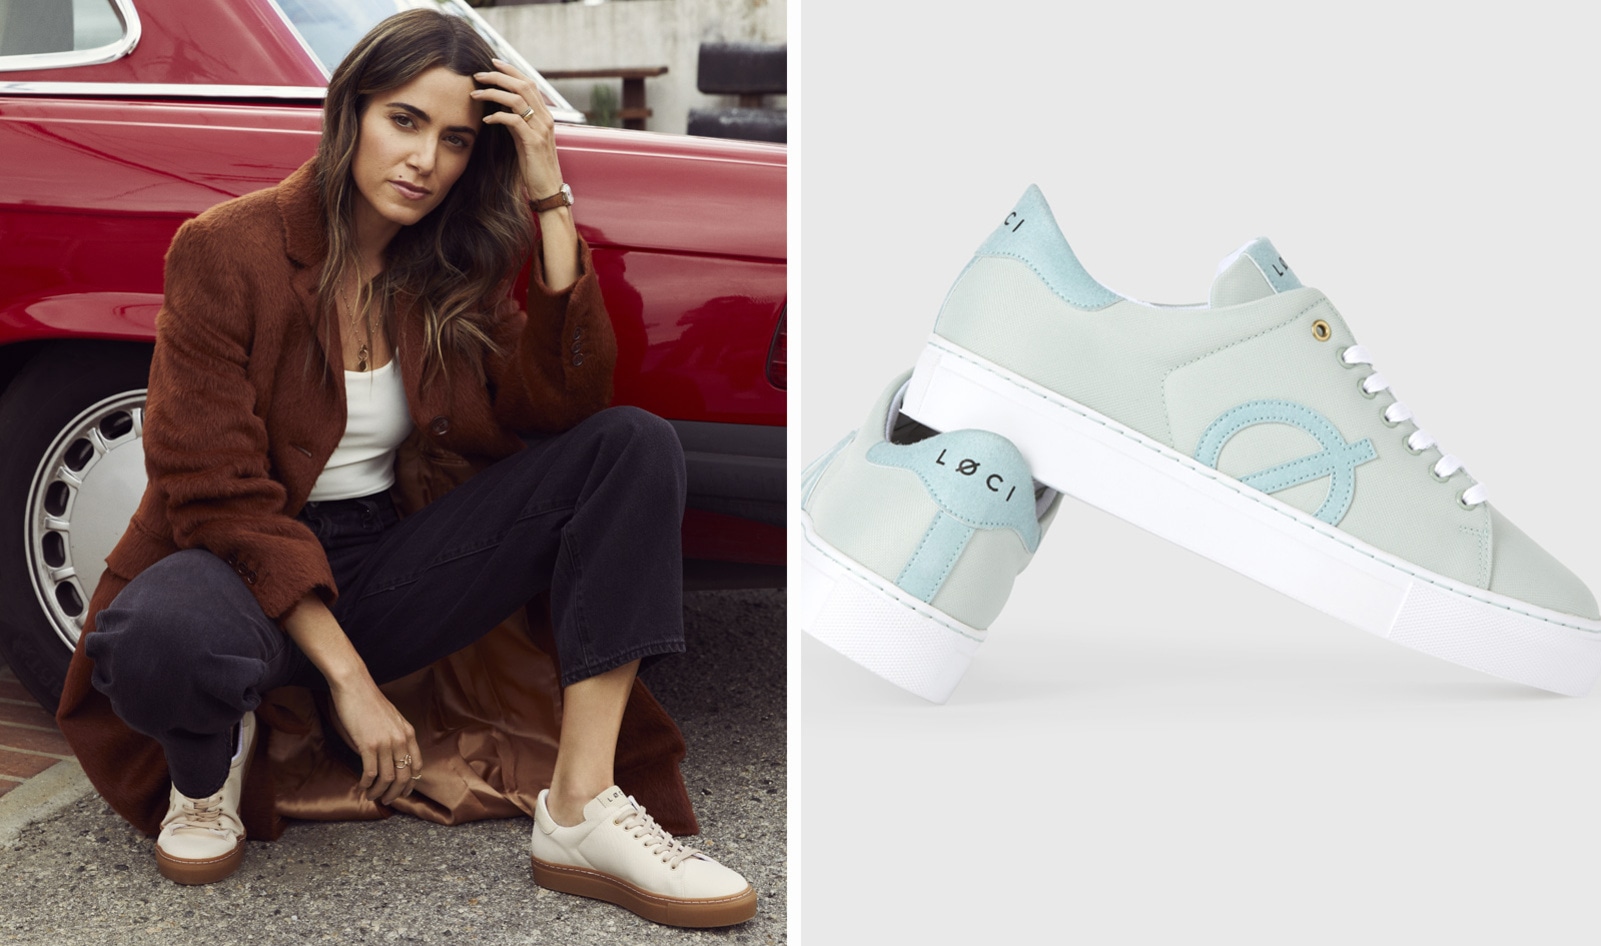 Twilight Star Nikki Reed Just Launched Vegan Shoes and Oscar Nominees Will  Be First to Wear Them | VegNews